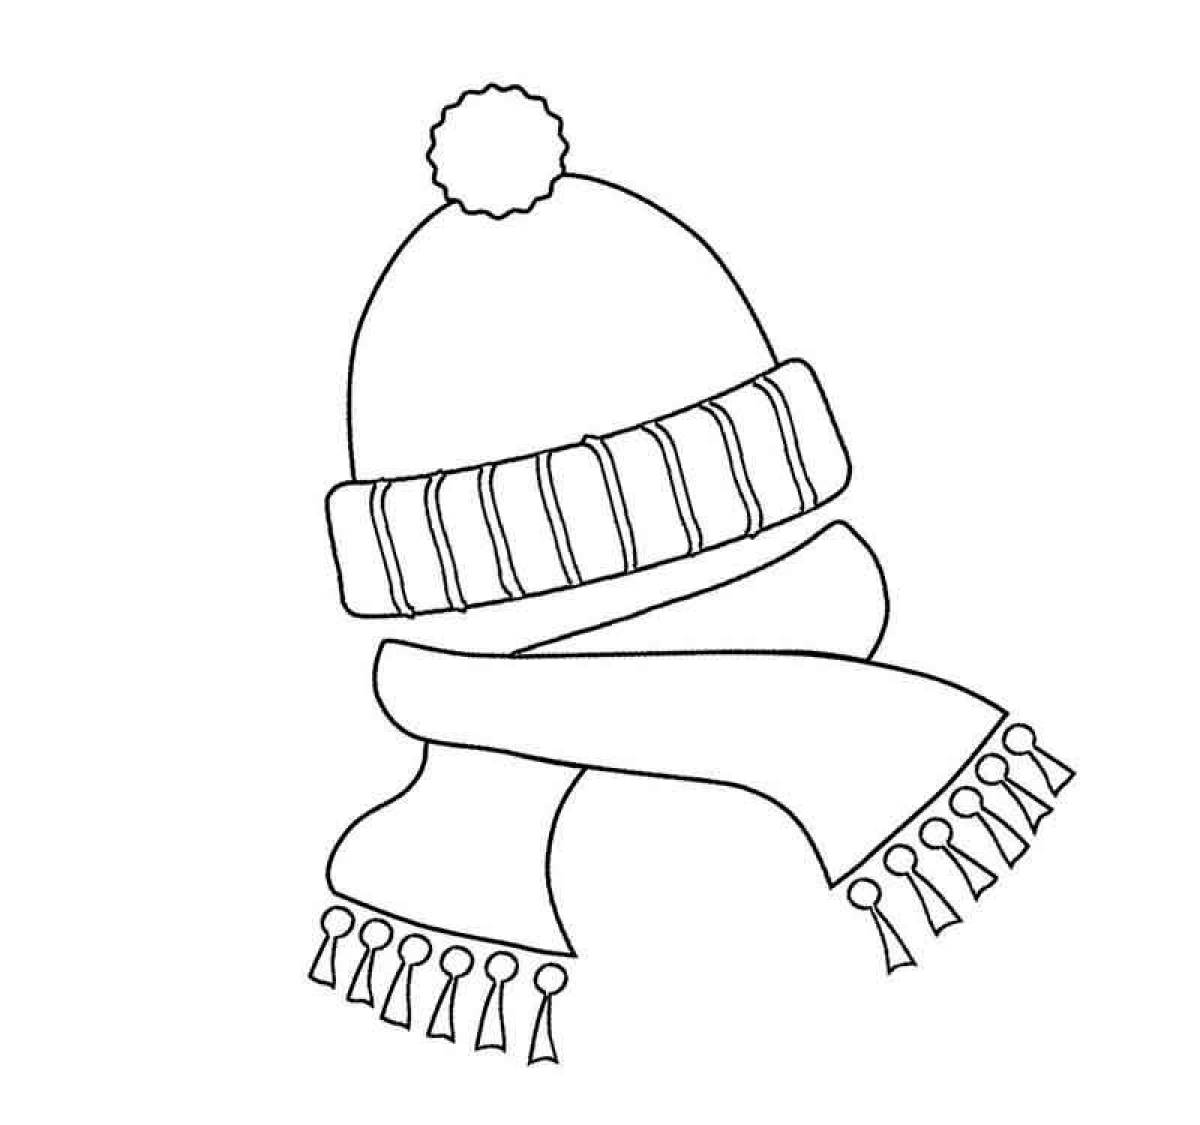 Playful scarf coloring page for kids